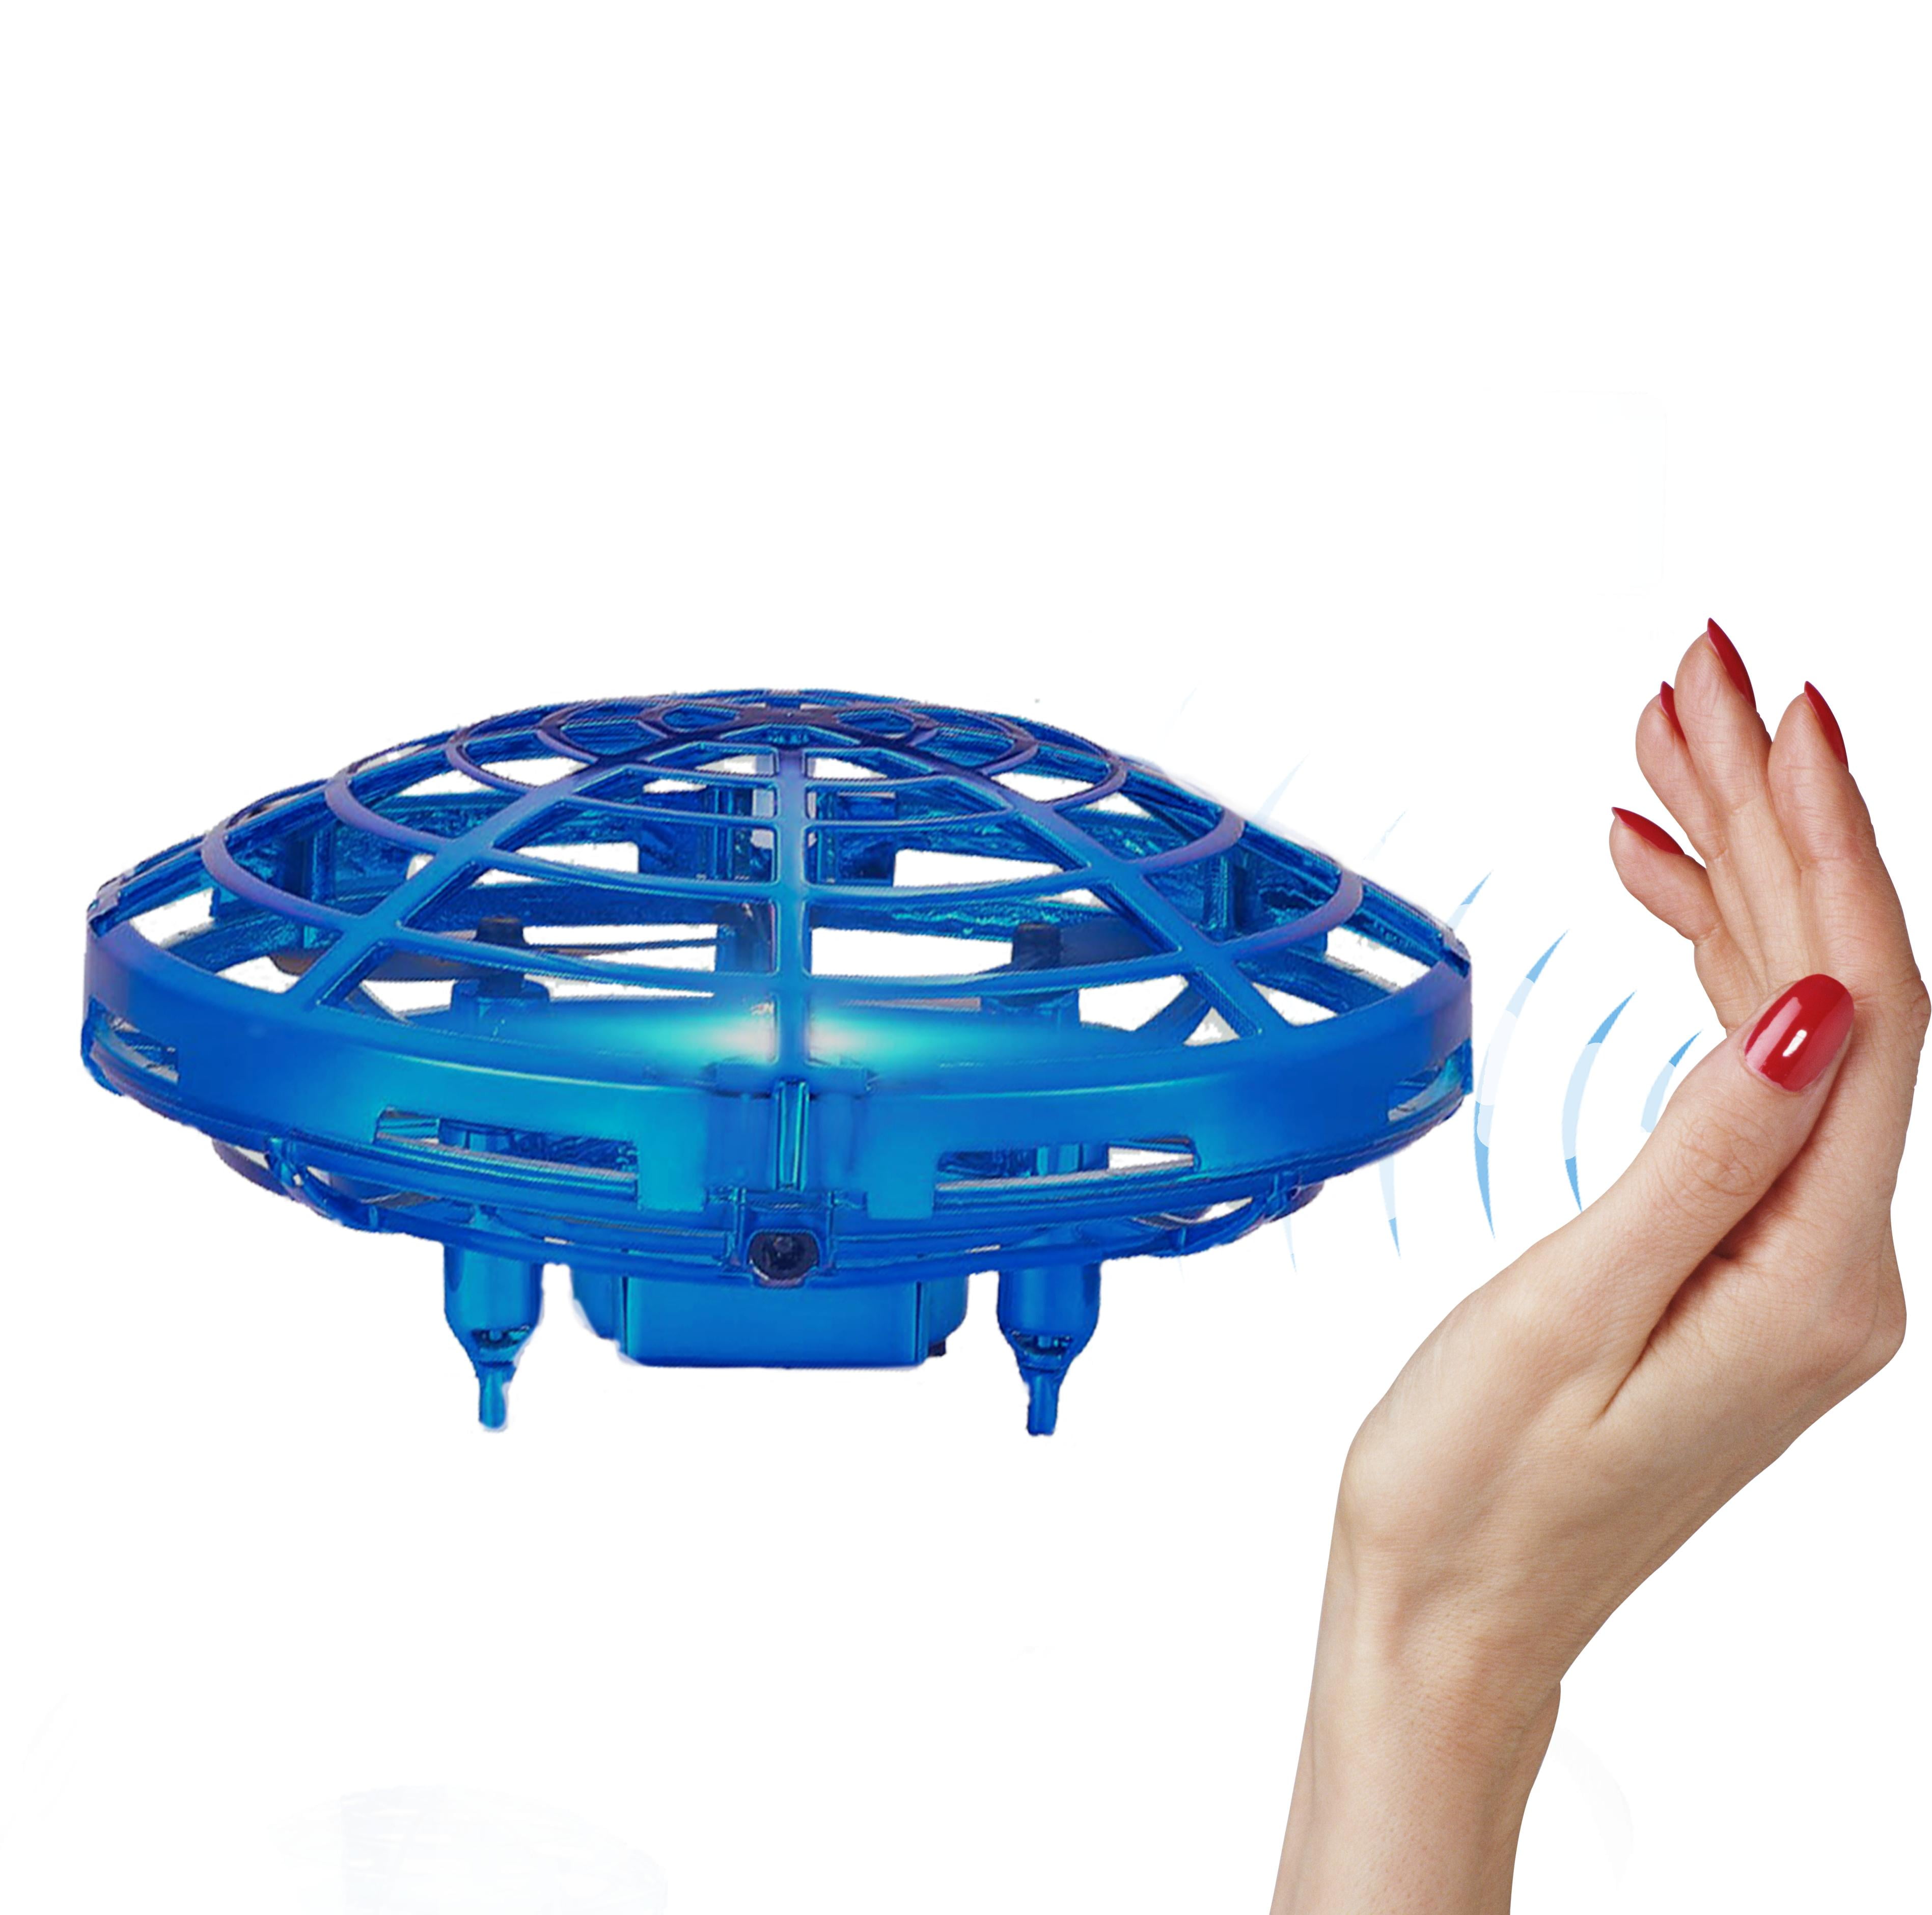 JUMOWA UFO Hand-Controlled Drones Toys Tech Gadgets Frisbee Hollow Mini Quadcopter Small Drone Xmas Aircraft Gifts for Kids Adult